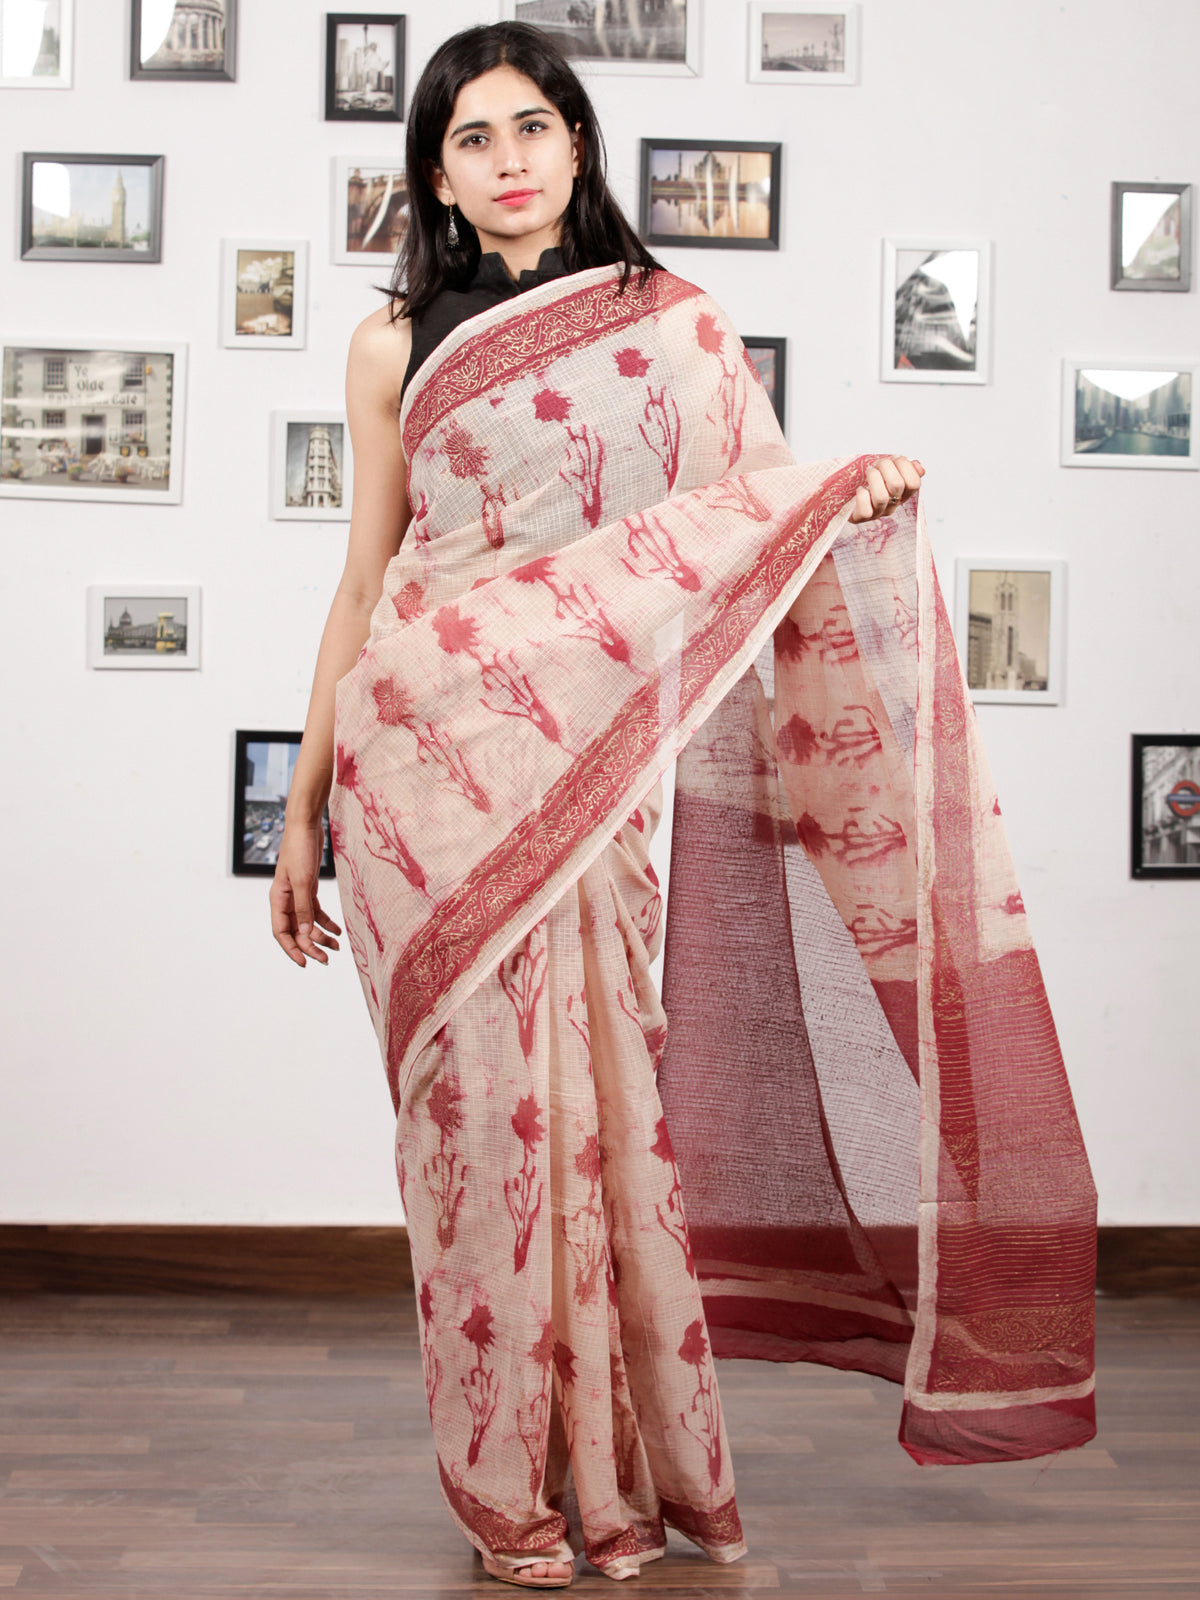 Beige Coral Hand Block Printed Kota Doria Saree in Natural Colors With Golden Highlighting - S031703142